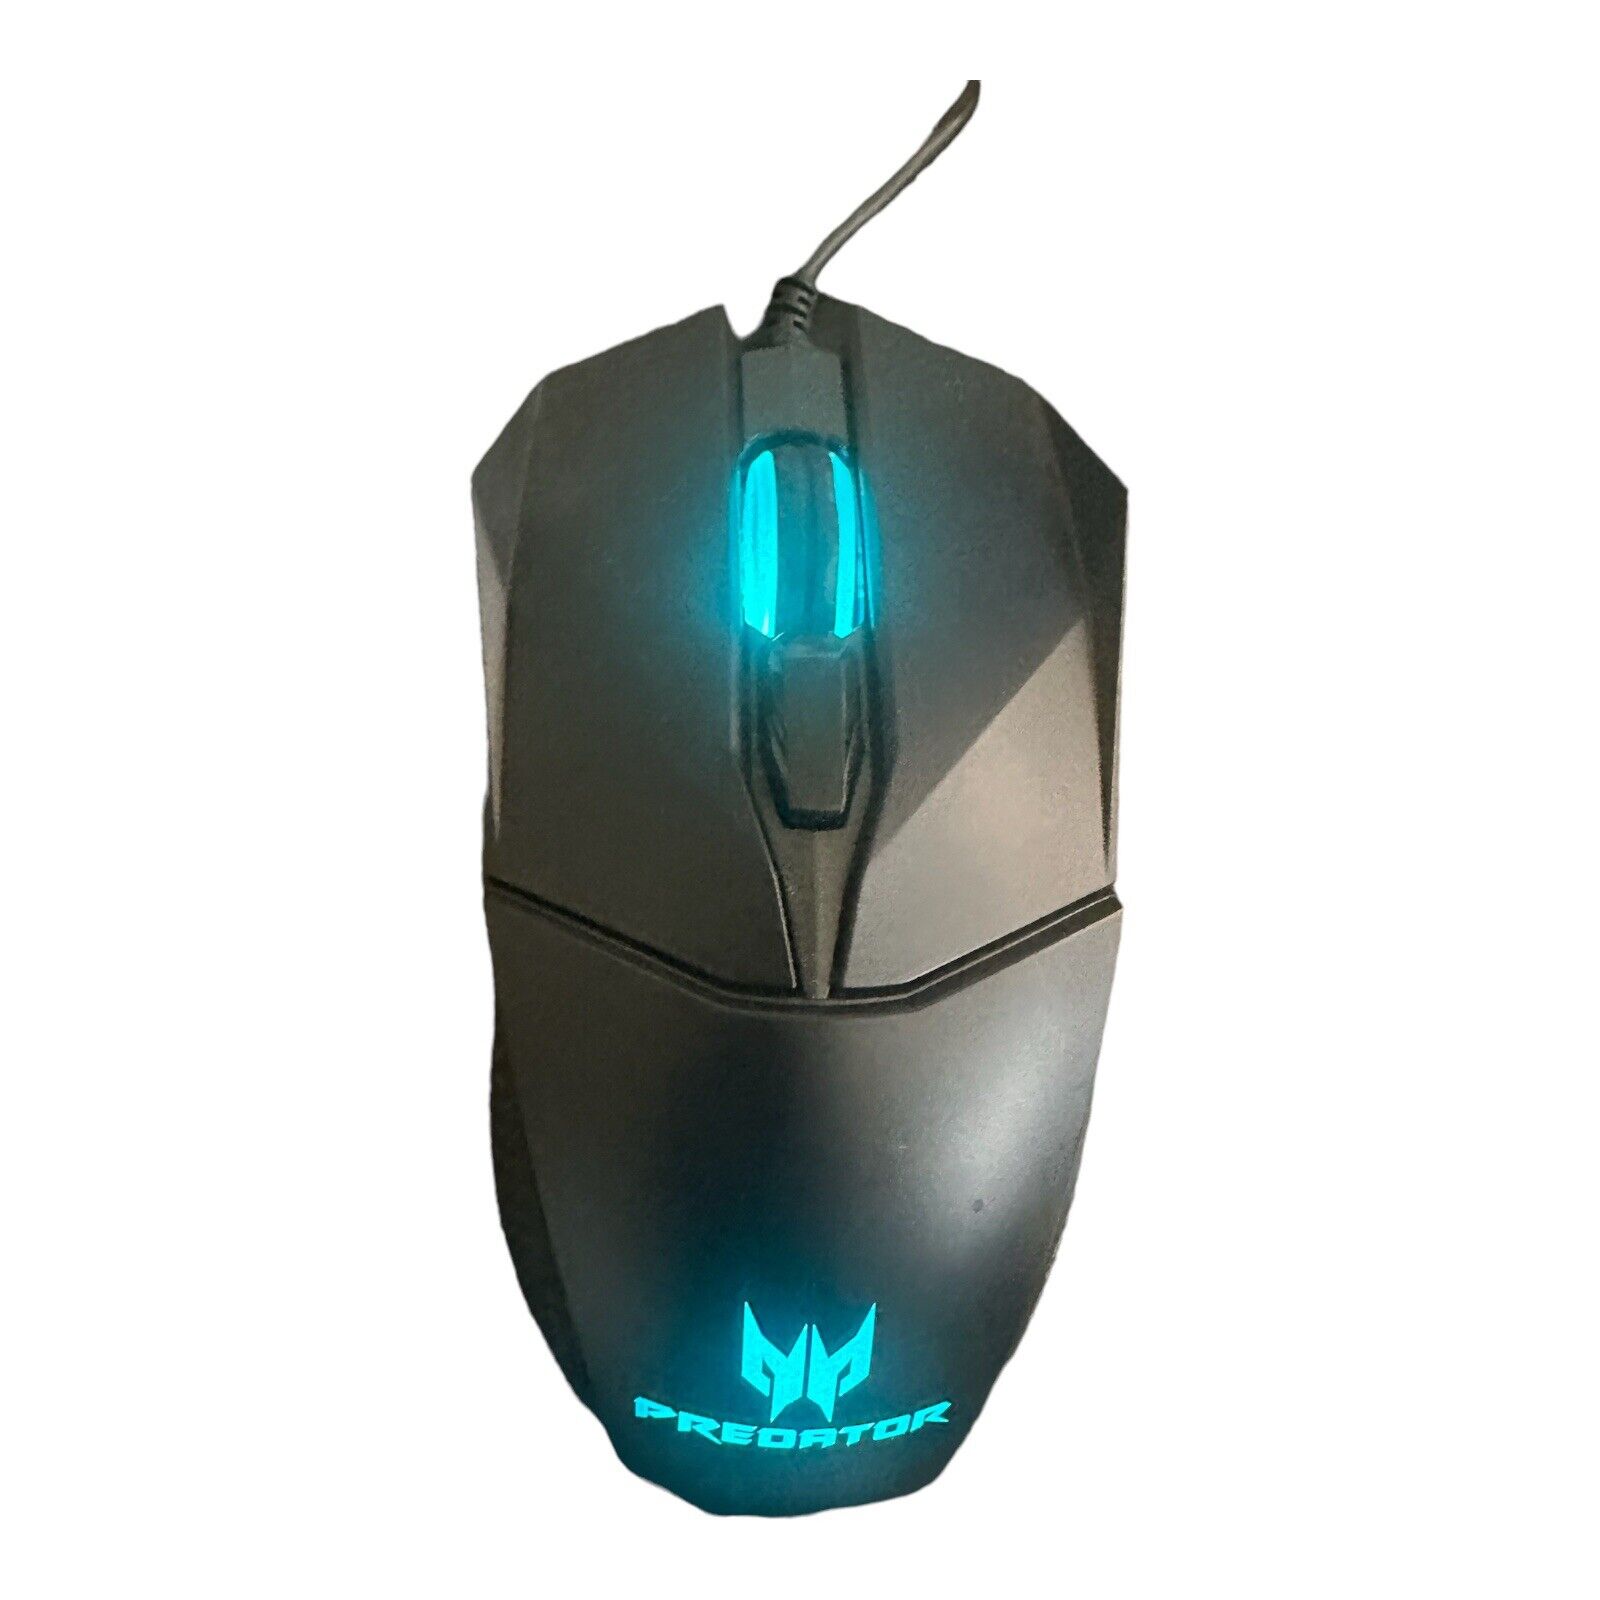 Acer Predator Cestus 335 Gaming Mouse - Excellent Condtion - Tested